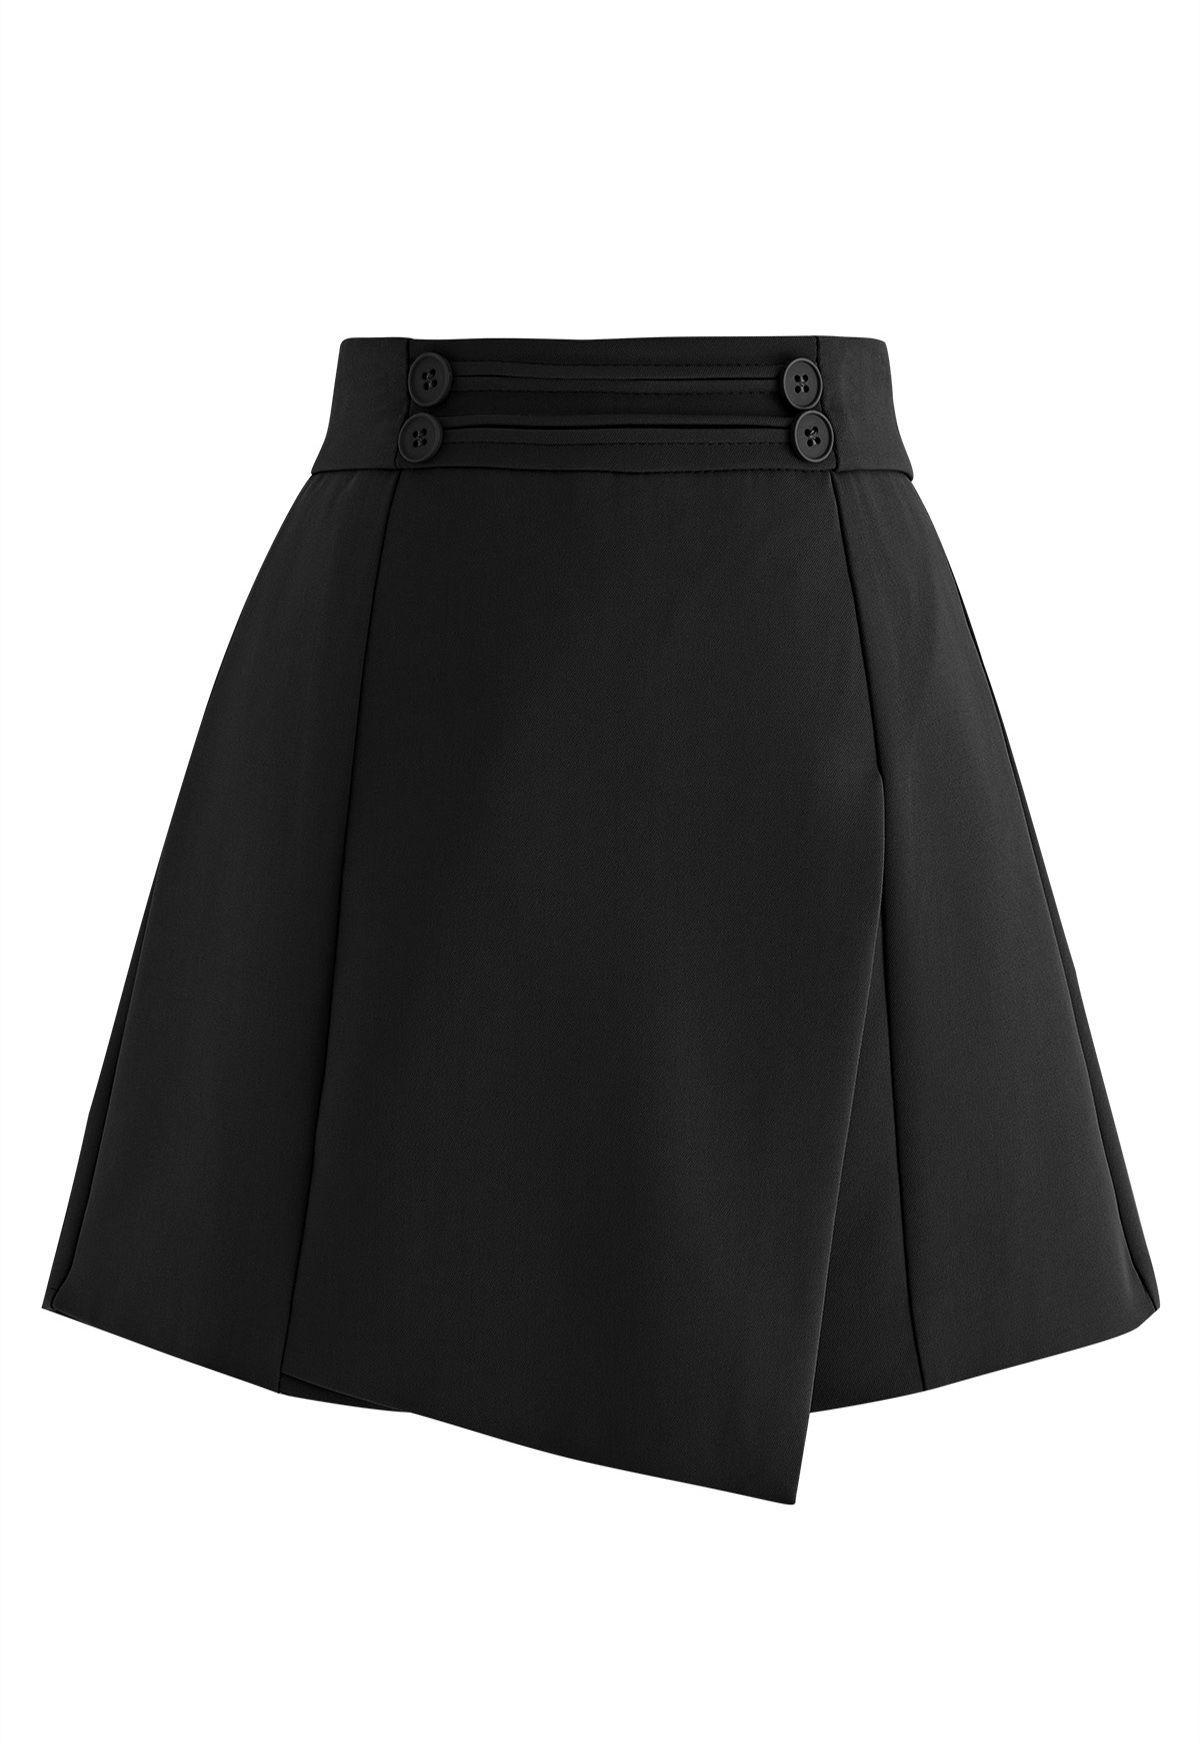 Buttons Decorated Flap Skorts in Black | Chicwish